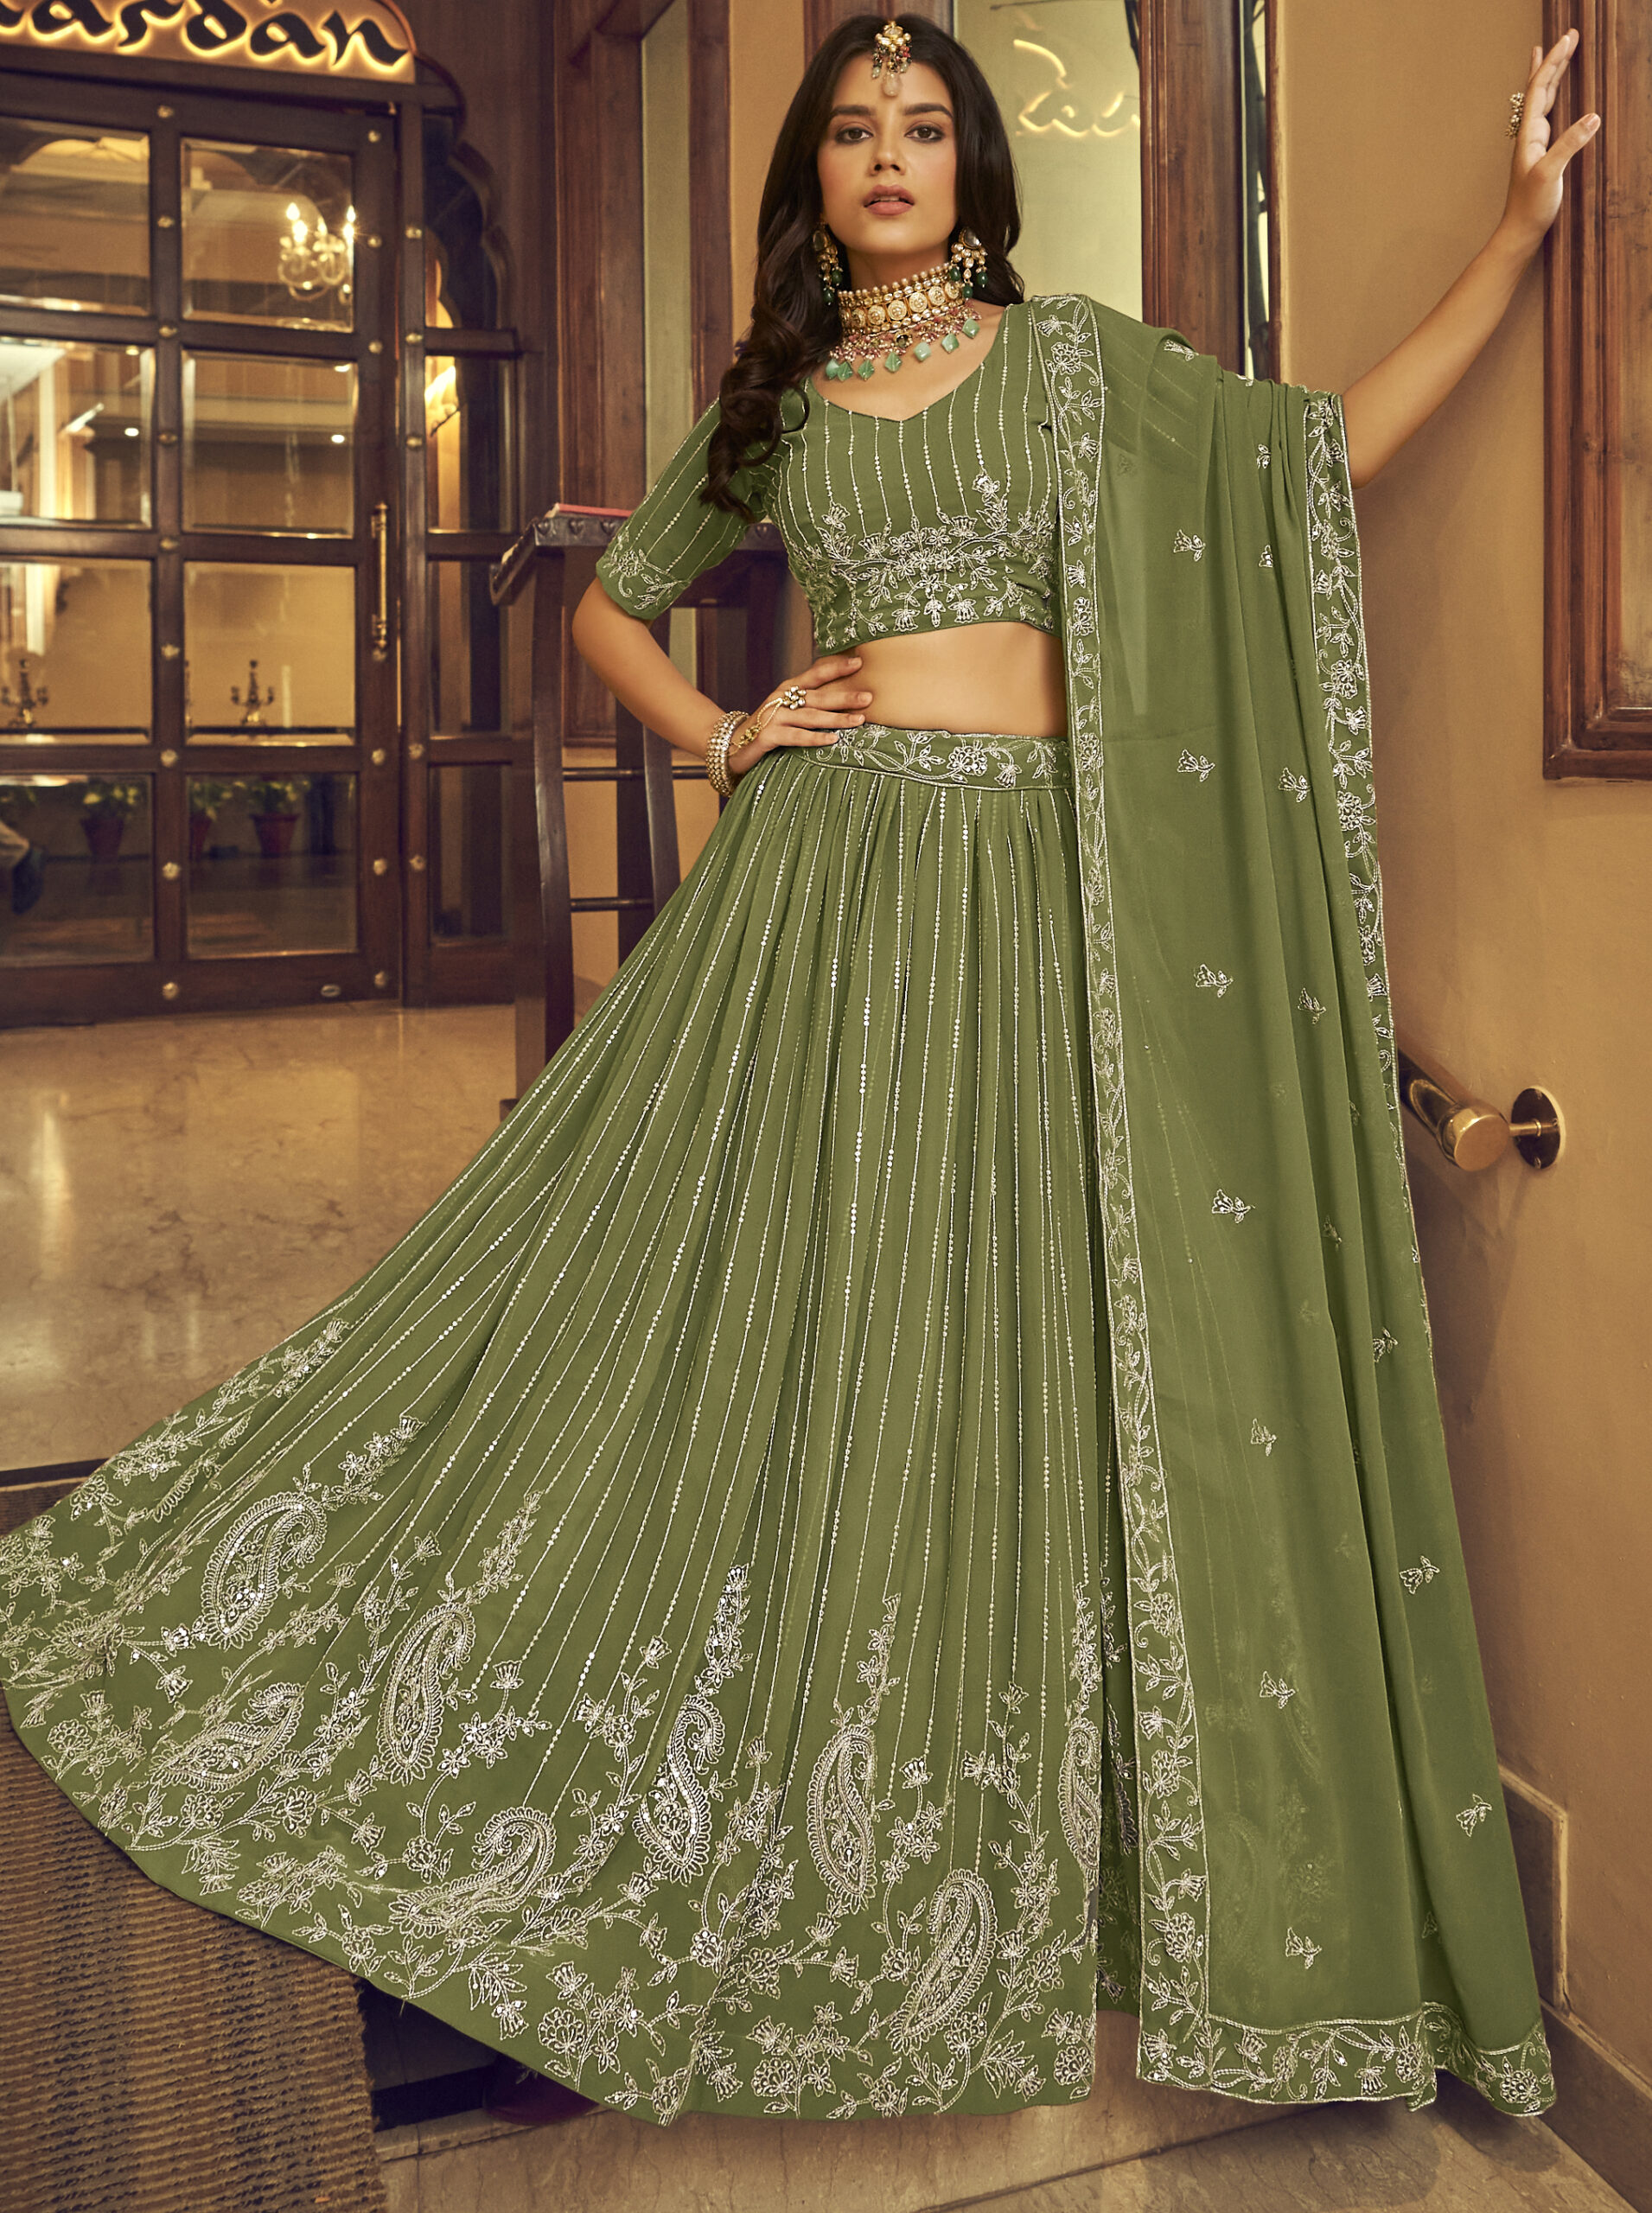 Buy Now Madhushala Grey Satin Benglory New Trendy Party Wear Lehenga With  Unstitched Blouse For Women Wear